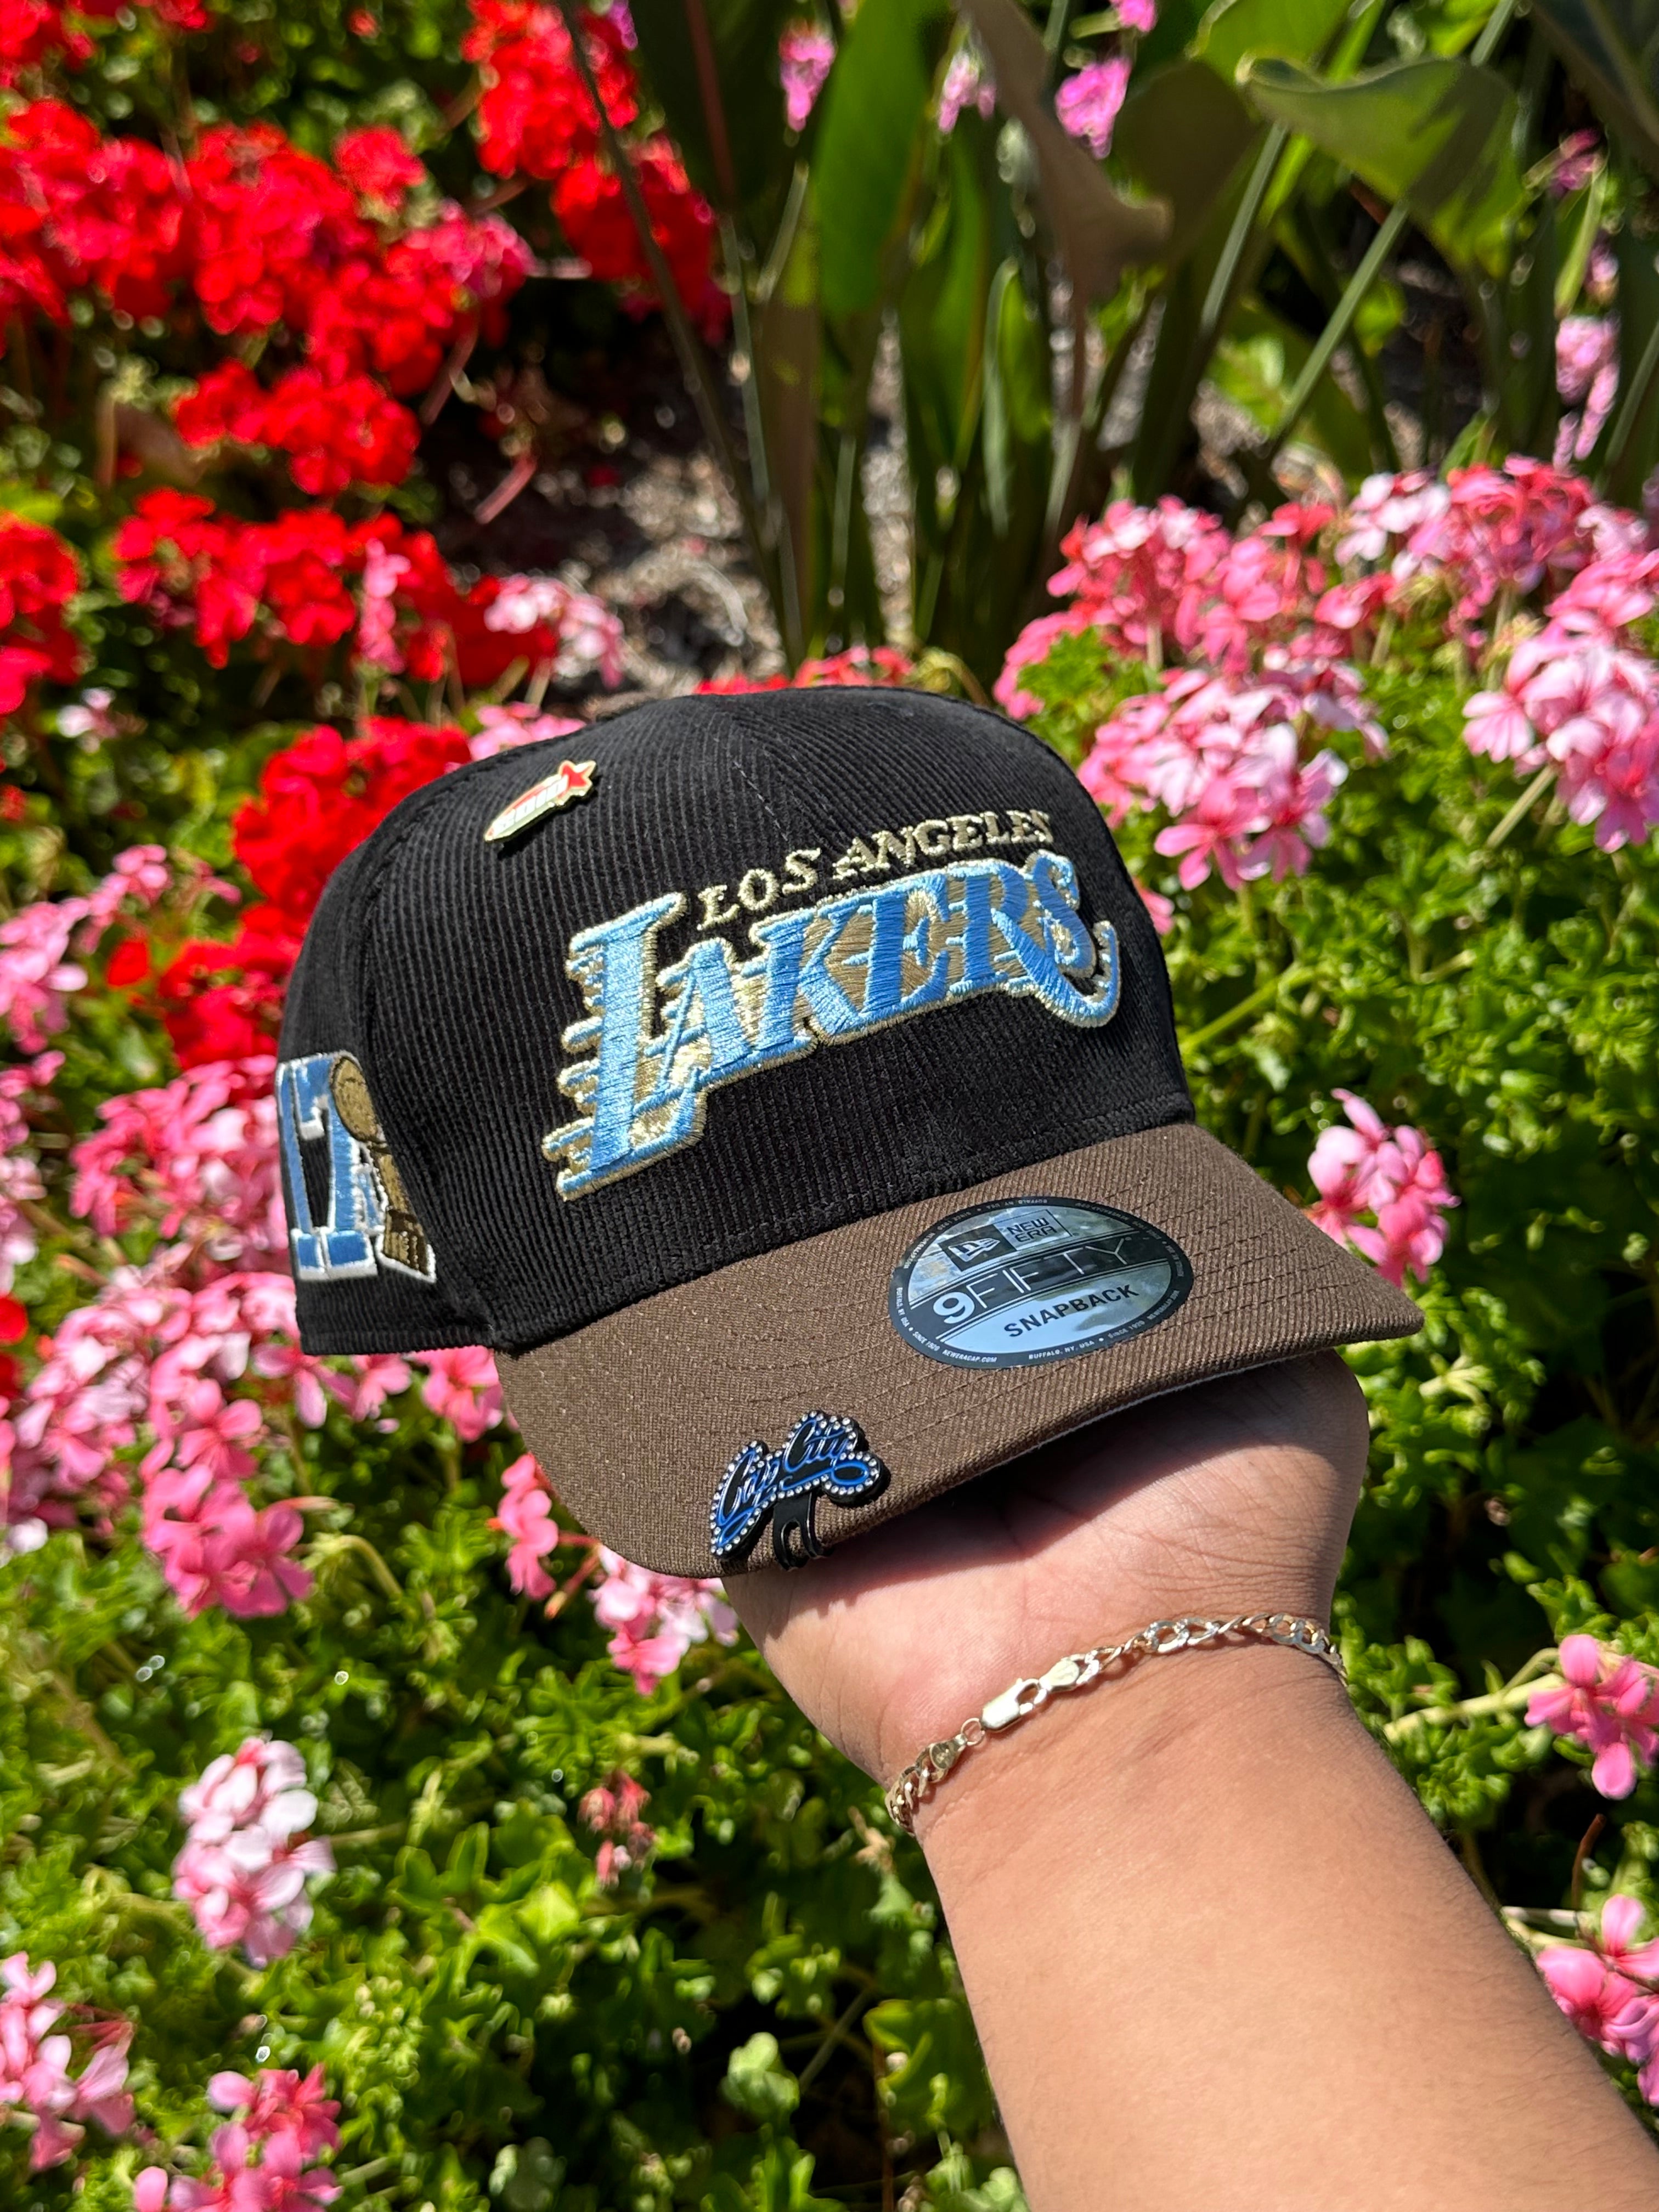 NEW ERA EXCLUSIVE 9FIFTY CORDUROY/BROWN LOS ANGELES LAKERS SCRIPT SNAPBACK W/ 17X CHAMPIONS SIDE PATCH